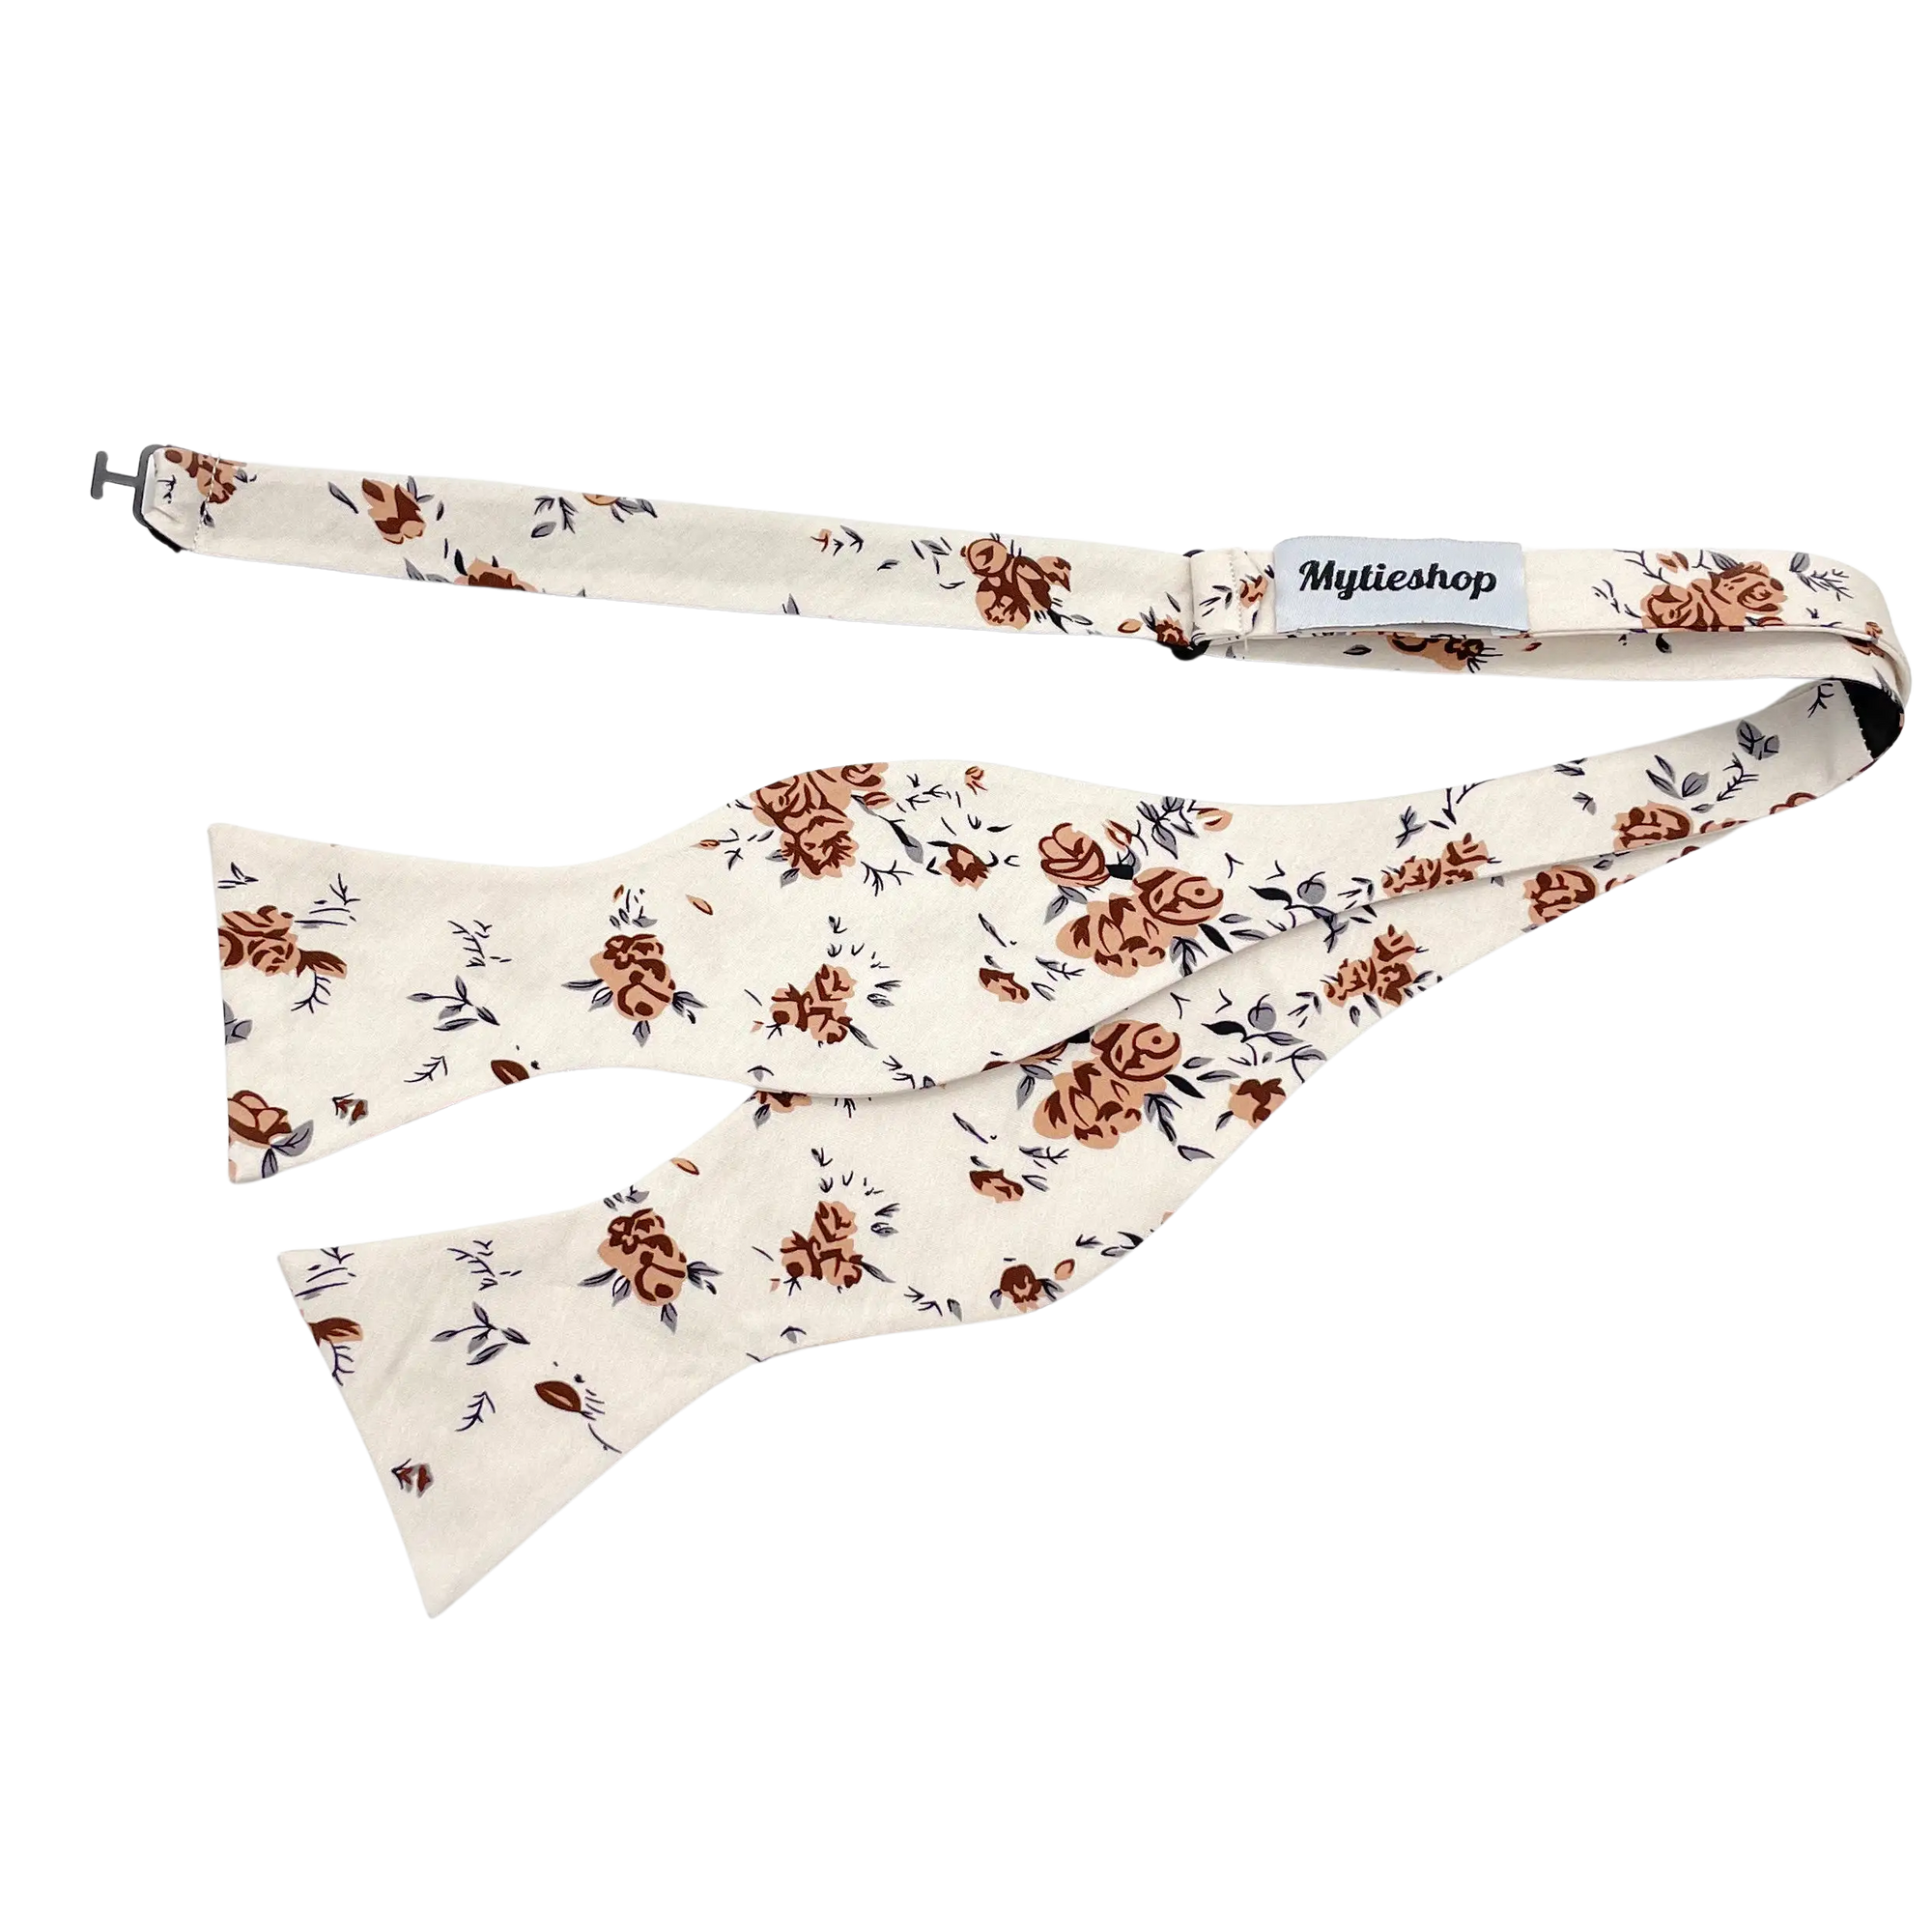 Beige Floral Bow Tie Self Tie with Brown Flowers for Men-Beige Floral Bow Tie Self Tie with Brown Flowers for Men Great for Weddings. 100% Linen Handmade Adjustable to fit most neck sizes 13 3/4&quot; - 18&quot; Beige in color Great for: Groom Groomsmen Wedding Shoots Formal Prom Fancy Parties Gifts and presents Beige floral tie self tie. Oatmeal. Beige. Champagne color theme. Monochromatic. Fall weddings. Ties. Tie. Groomsmen ideas colors. Beige and Brown Floral Bow Tie for weddings groom Beige Self tie 